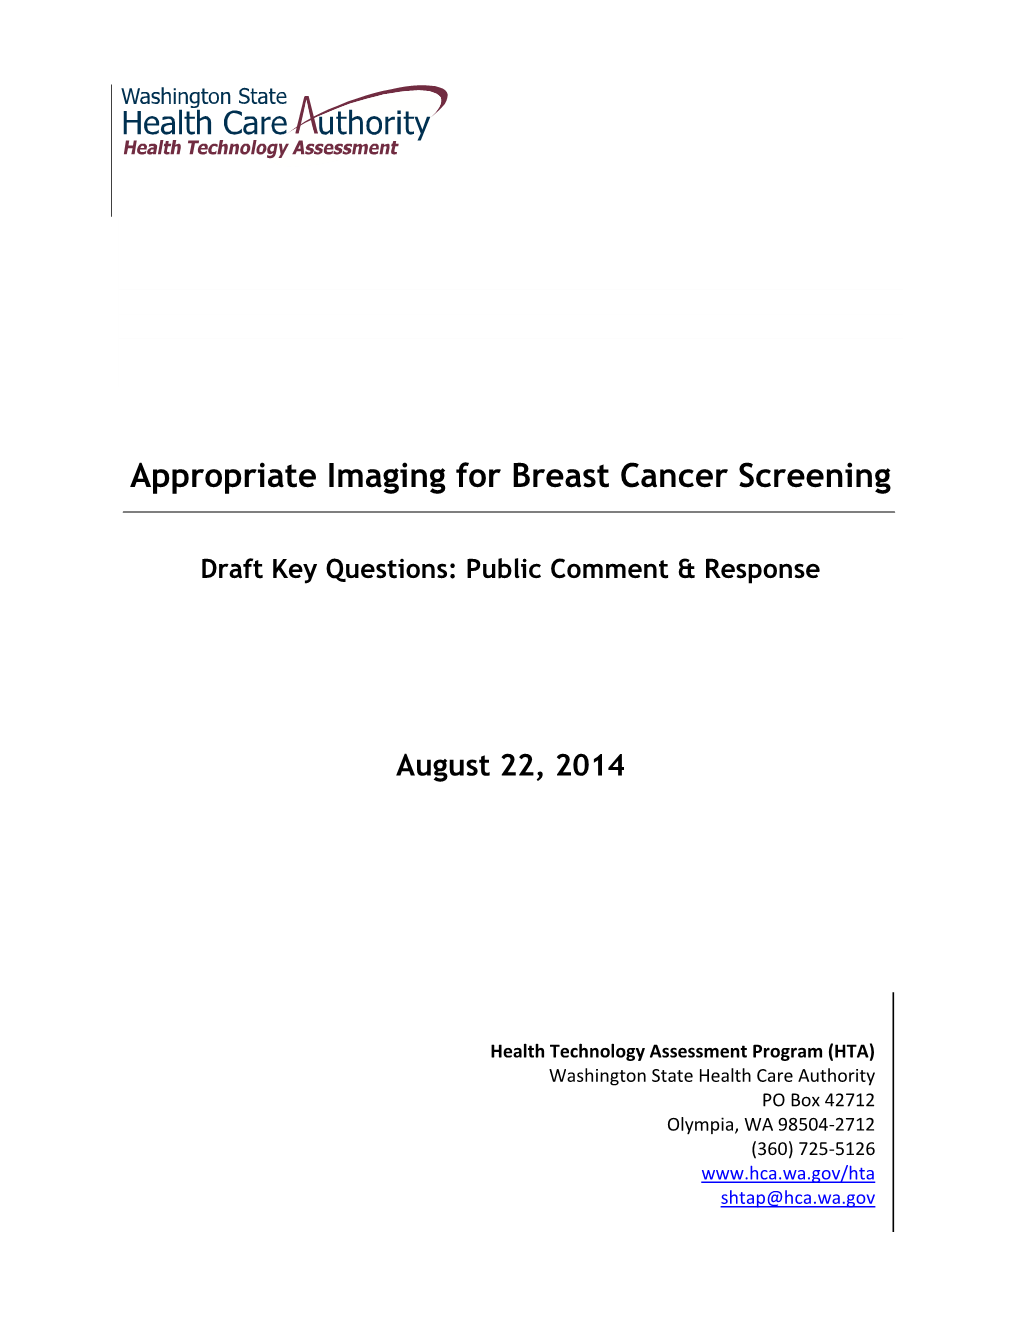 Appropriate Imaging for Breast Cancer Screening